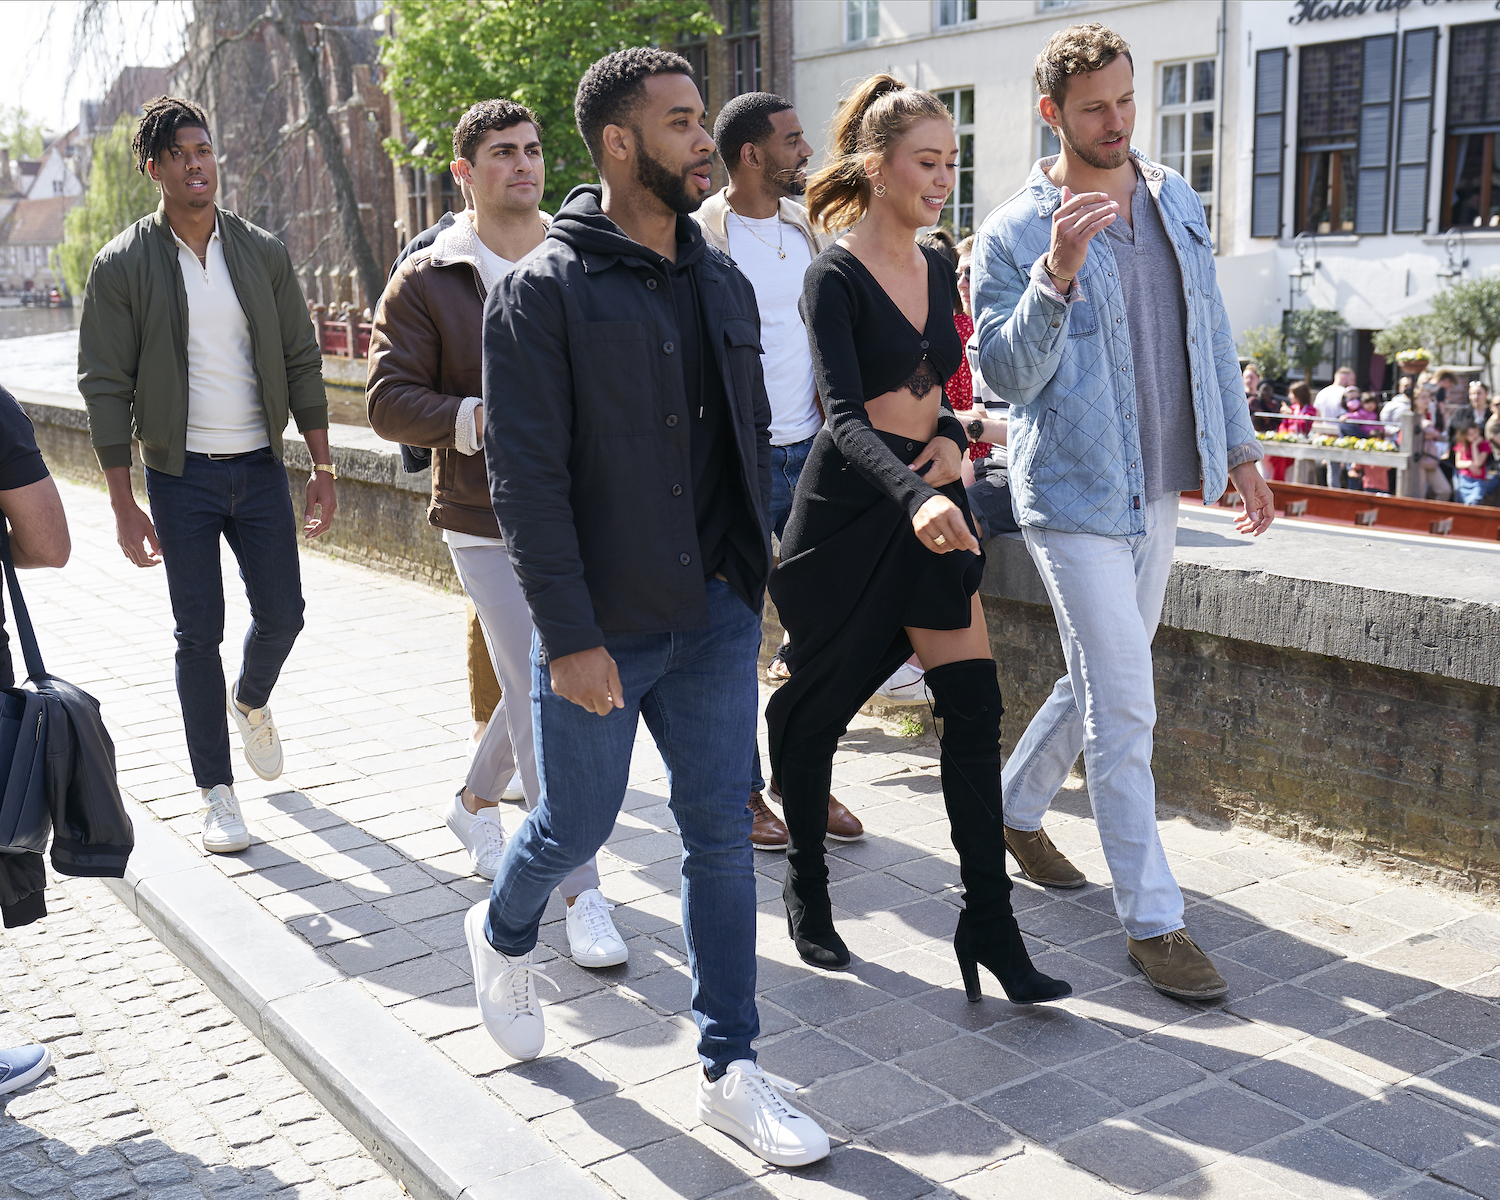 Gabby Windey in 'The Bachelorette' Season 19 walking with her contestants